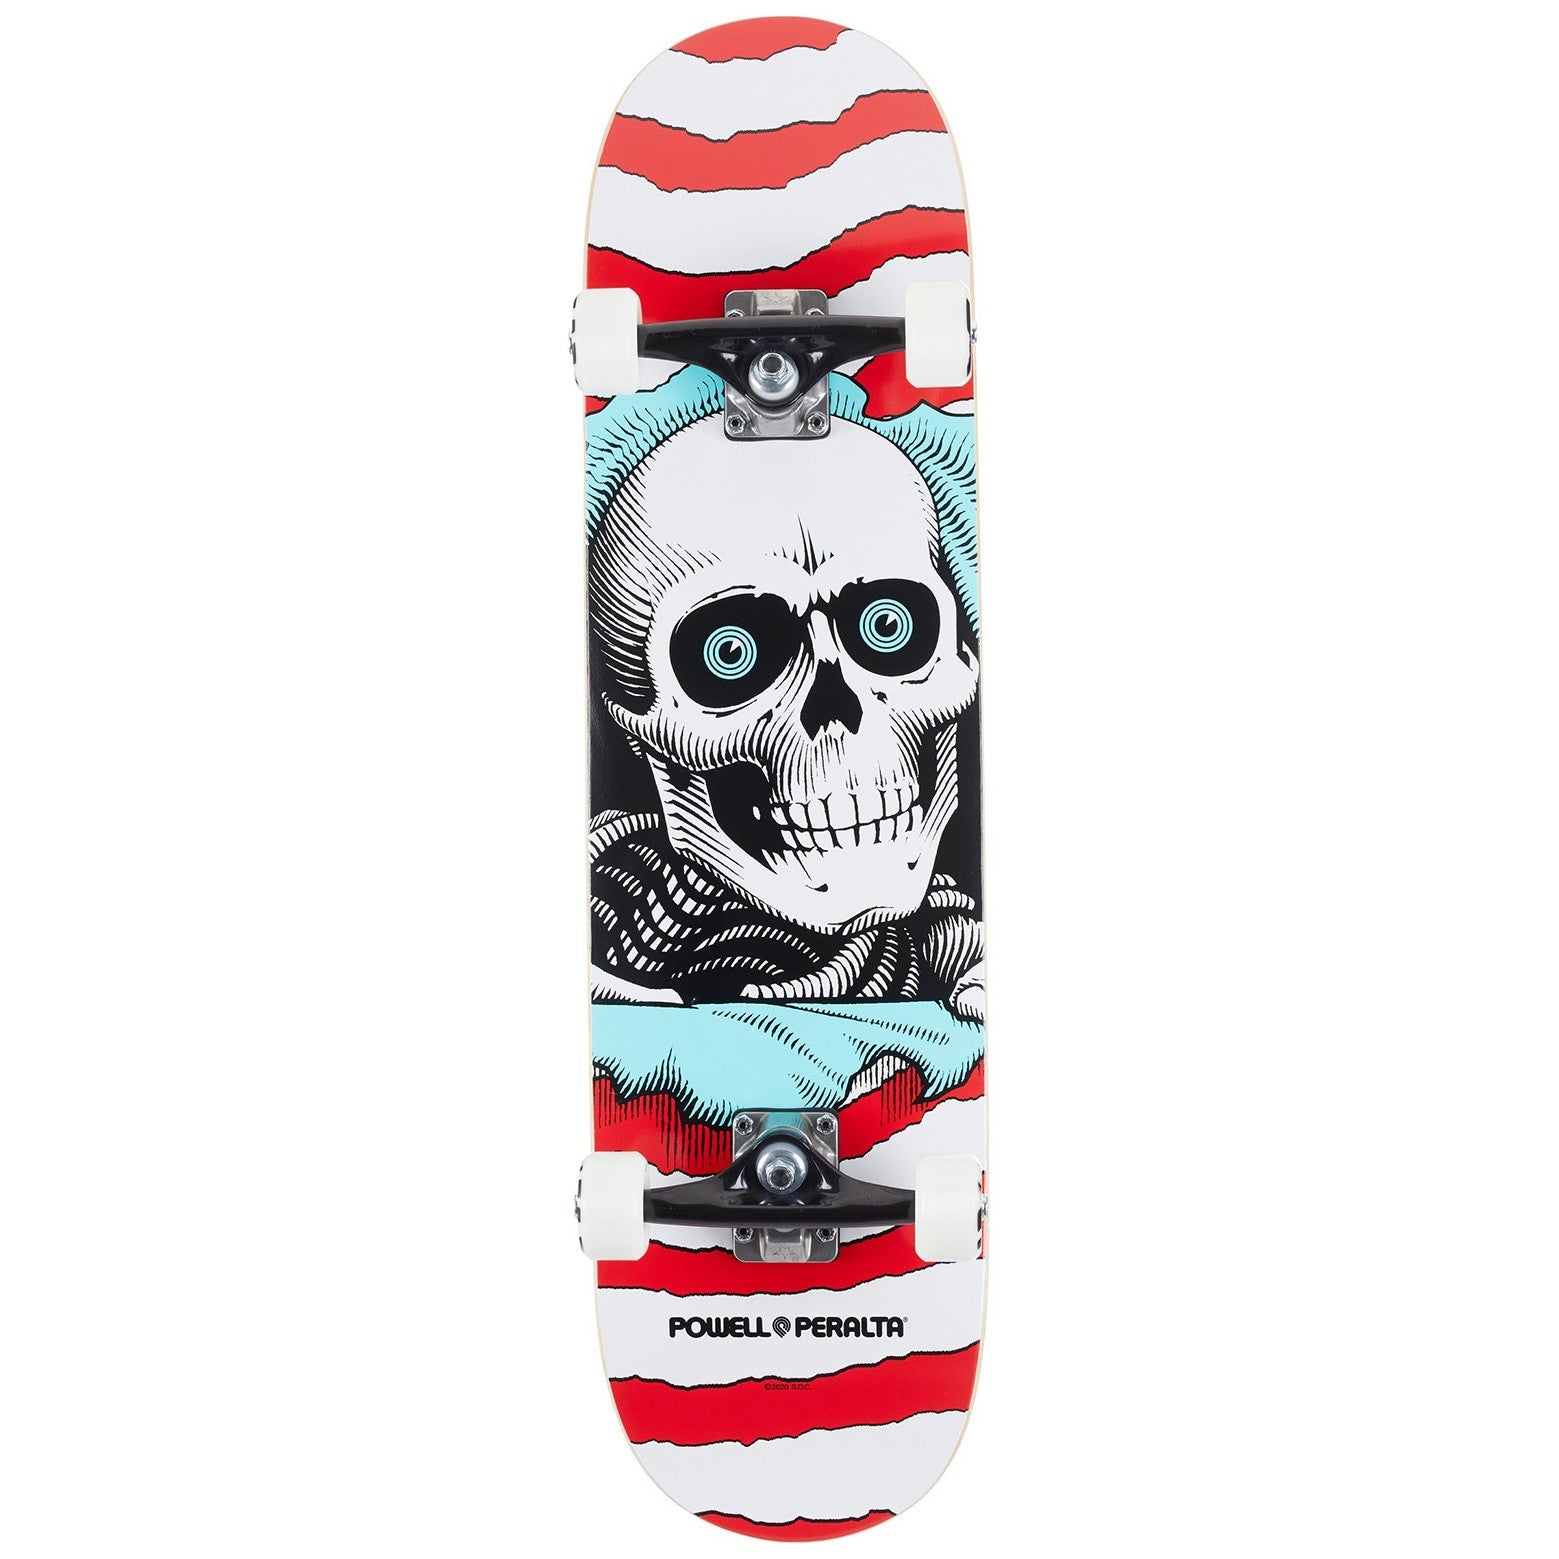 Powell Peralta - Ripper Complete 8.0 x 31.45 Inch - RED